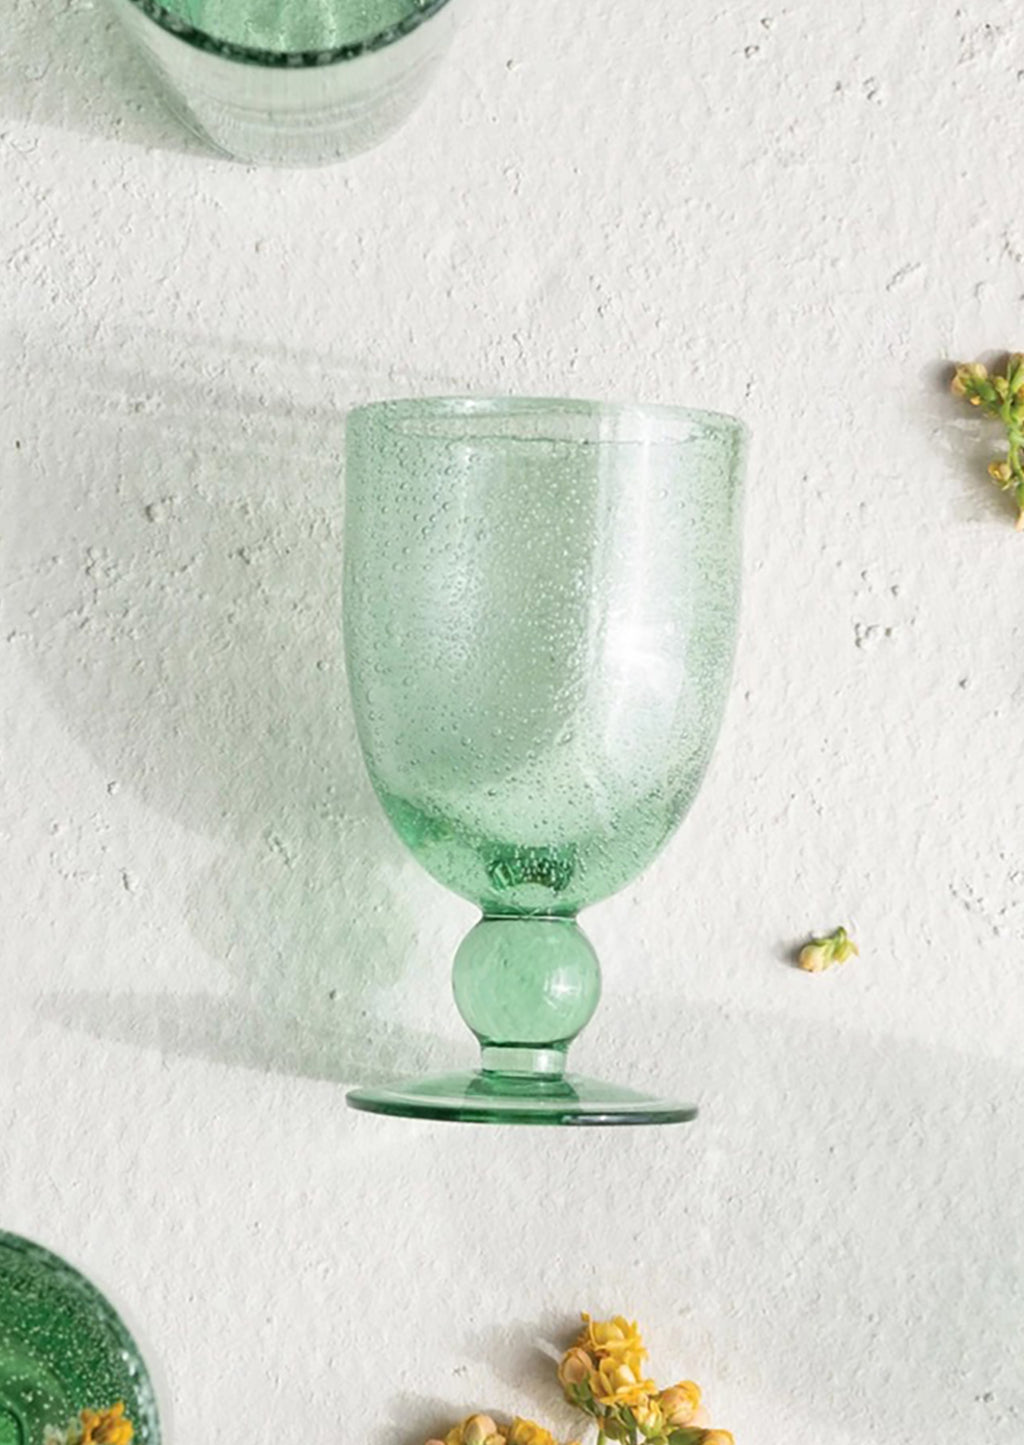 1: A wine glass made of recycled glass.